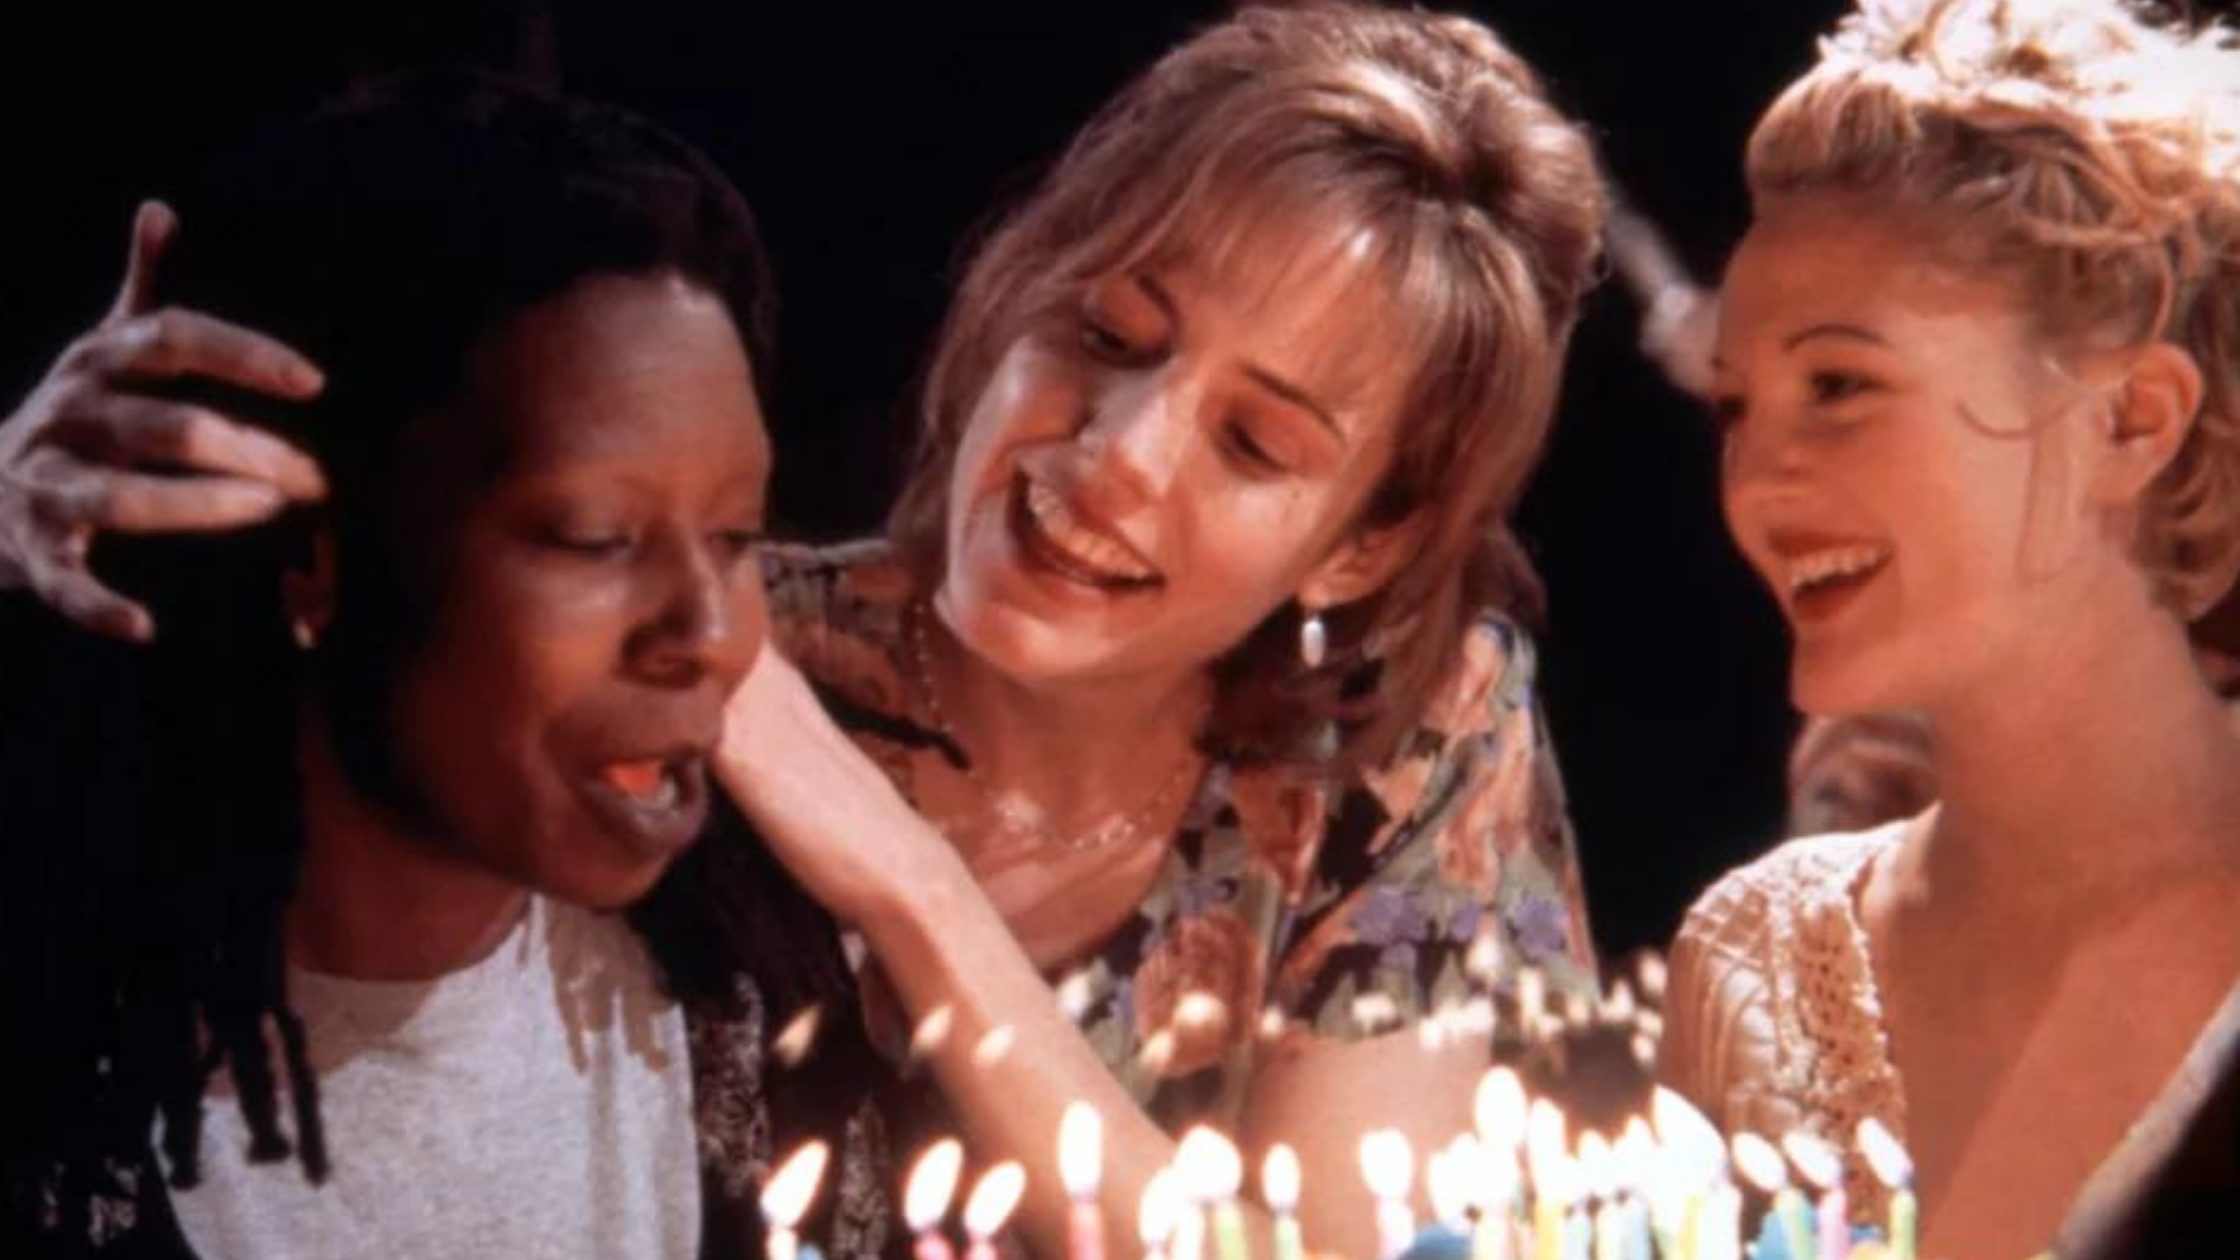 The 10 Best Movies on HIV/AIDS